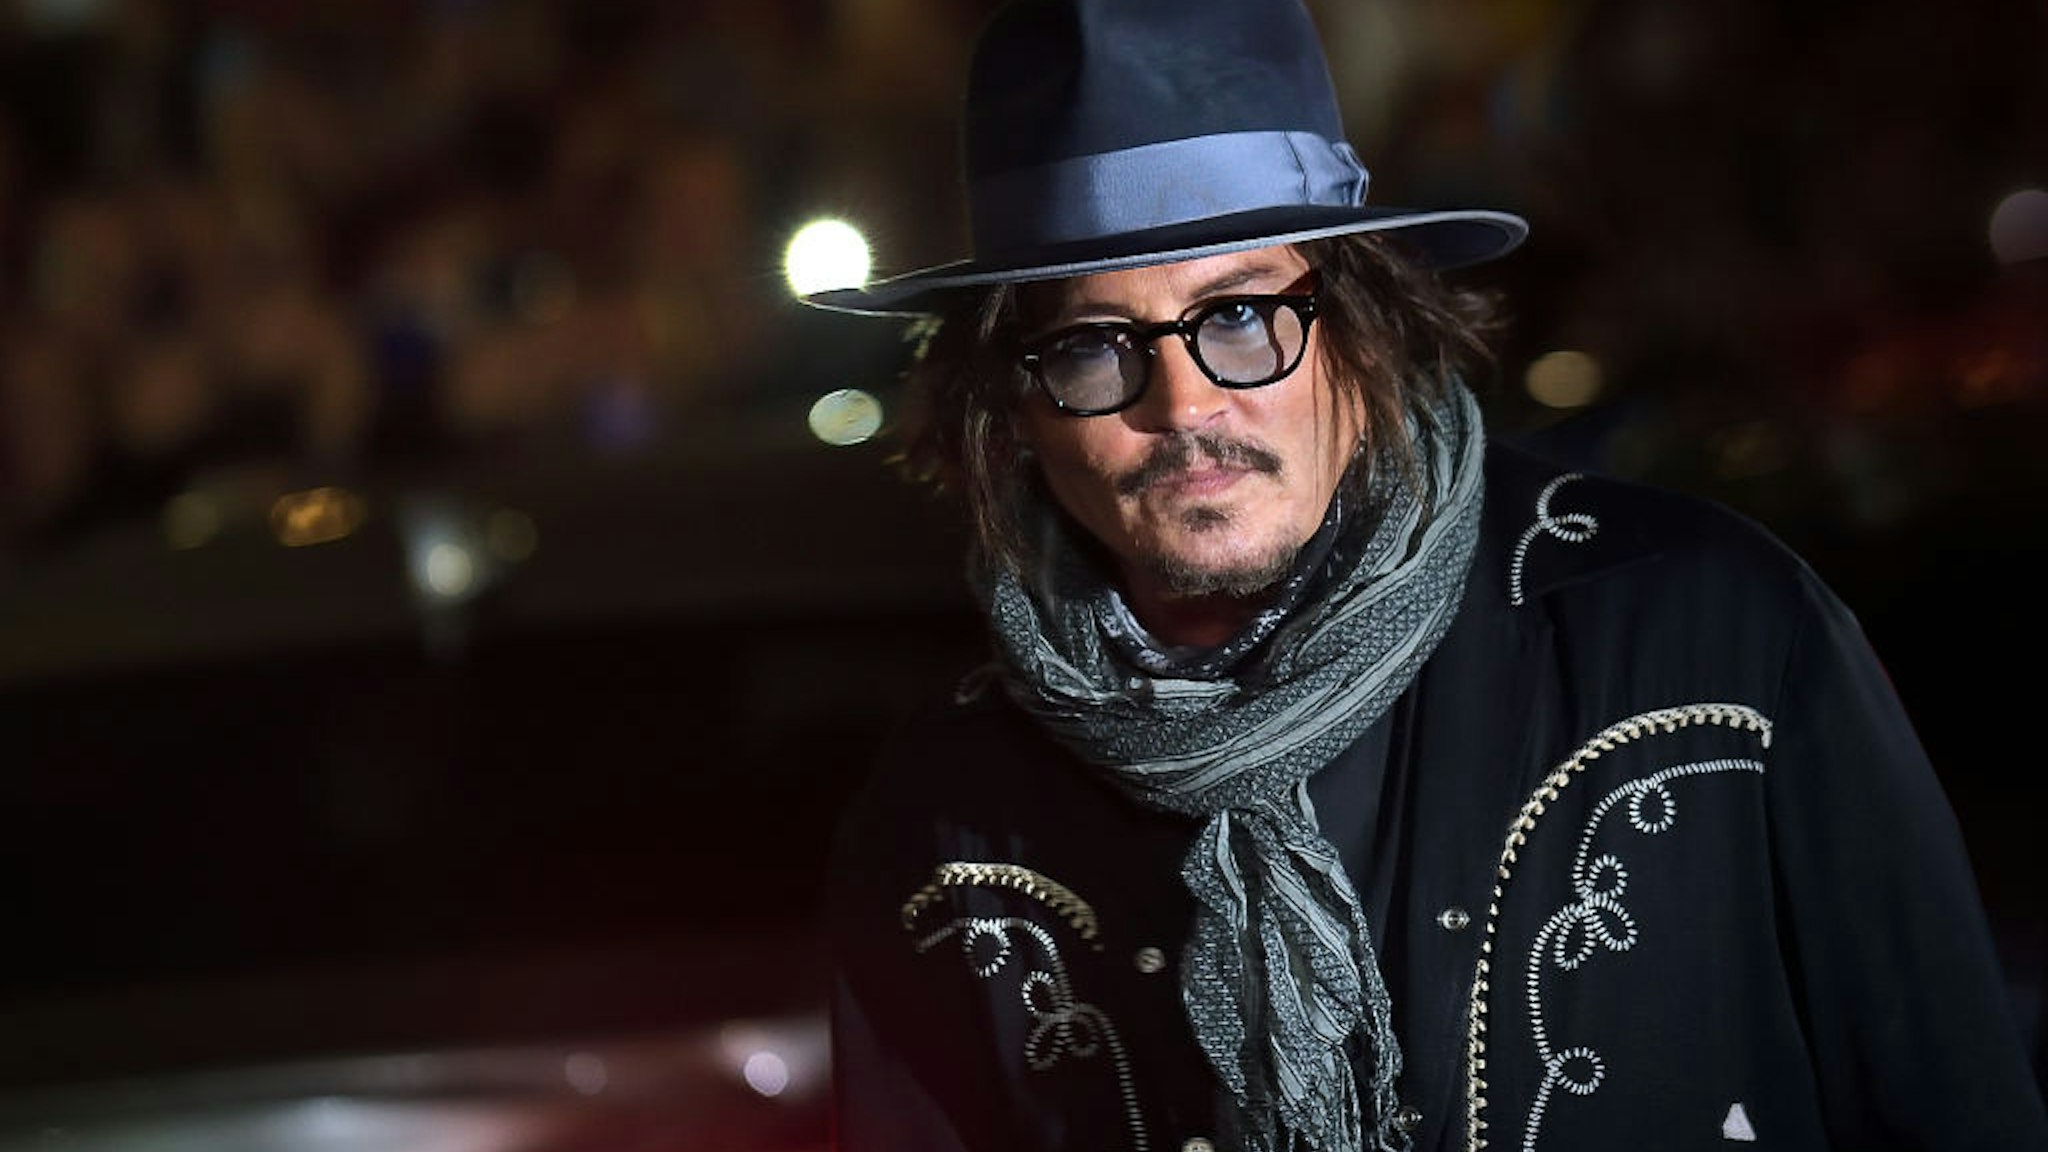 American actor Johnny Depp at Rome Film Fest 2021. Puffins red carpet. Rome (Italy), October 17th, 2021